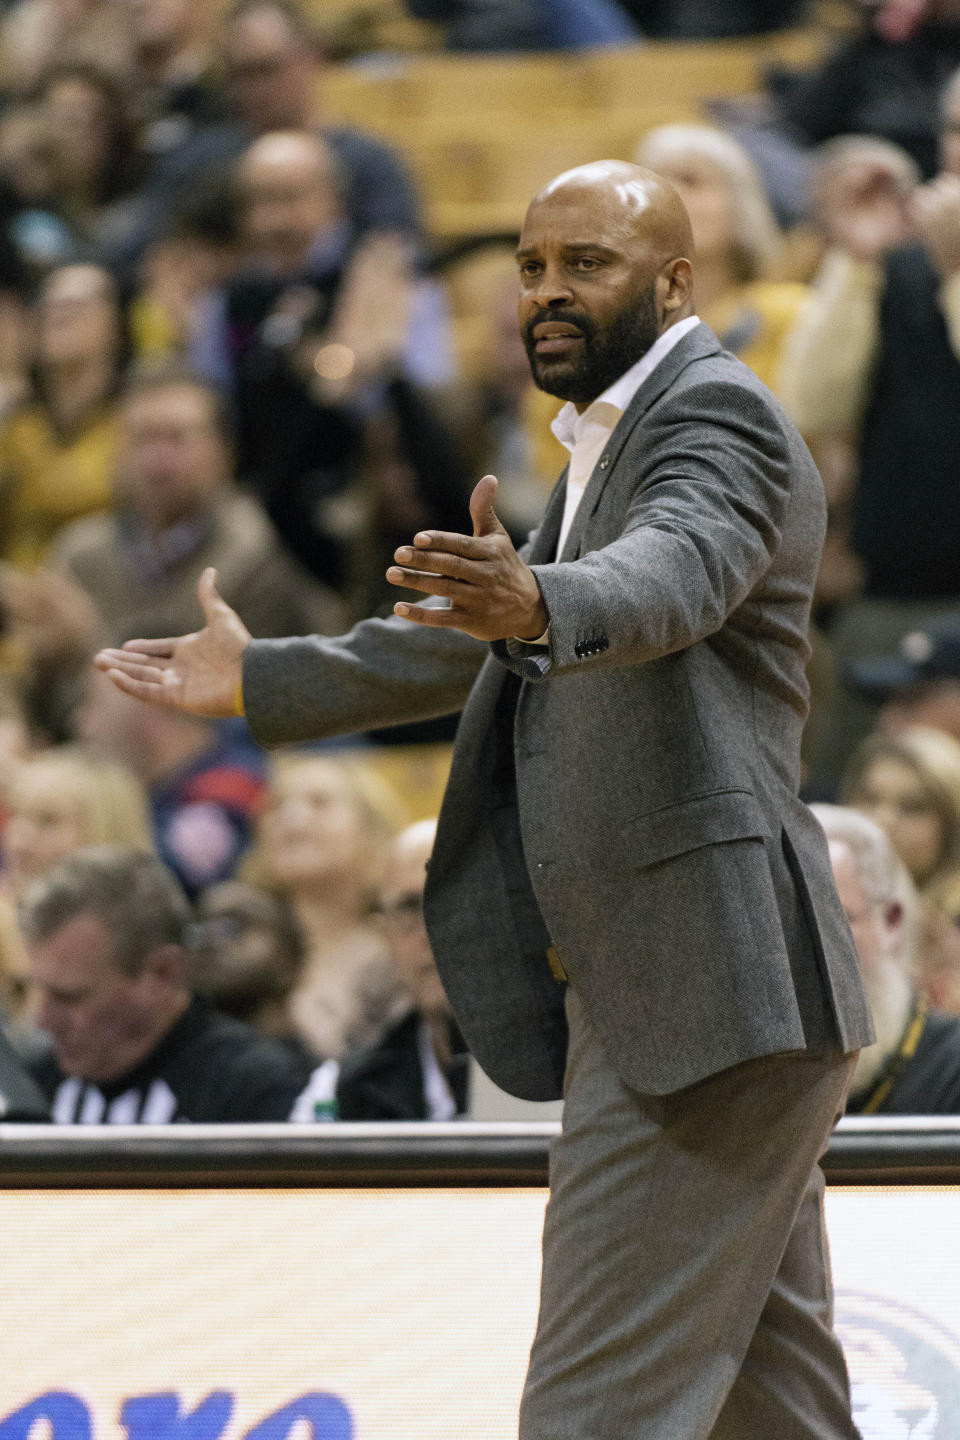 Missouri head coach Cuonzo Martin looks for a call during the second half of an NCAA college basketball game against Mississippi Tuesday, Feb. 18, 2020, in Columbia, Mo. Missouri won 71-68.(AP Photo/L.G. Patterson)